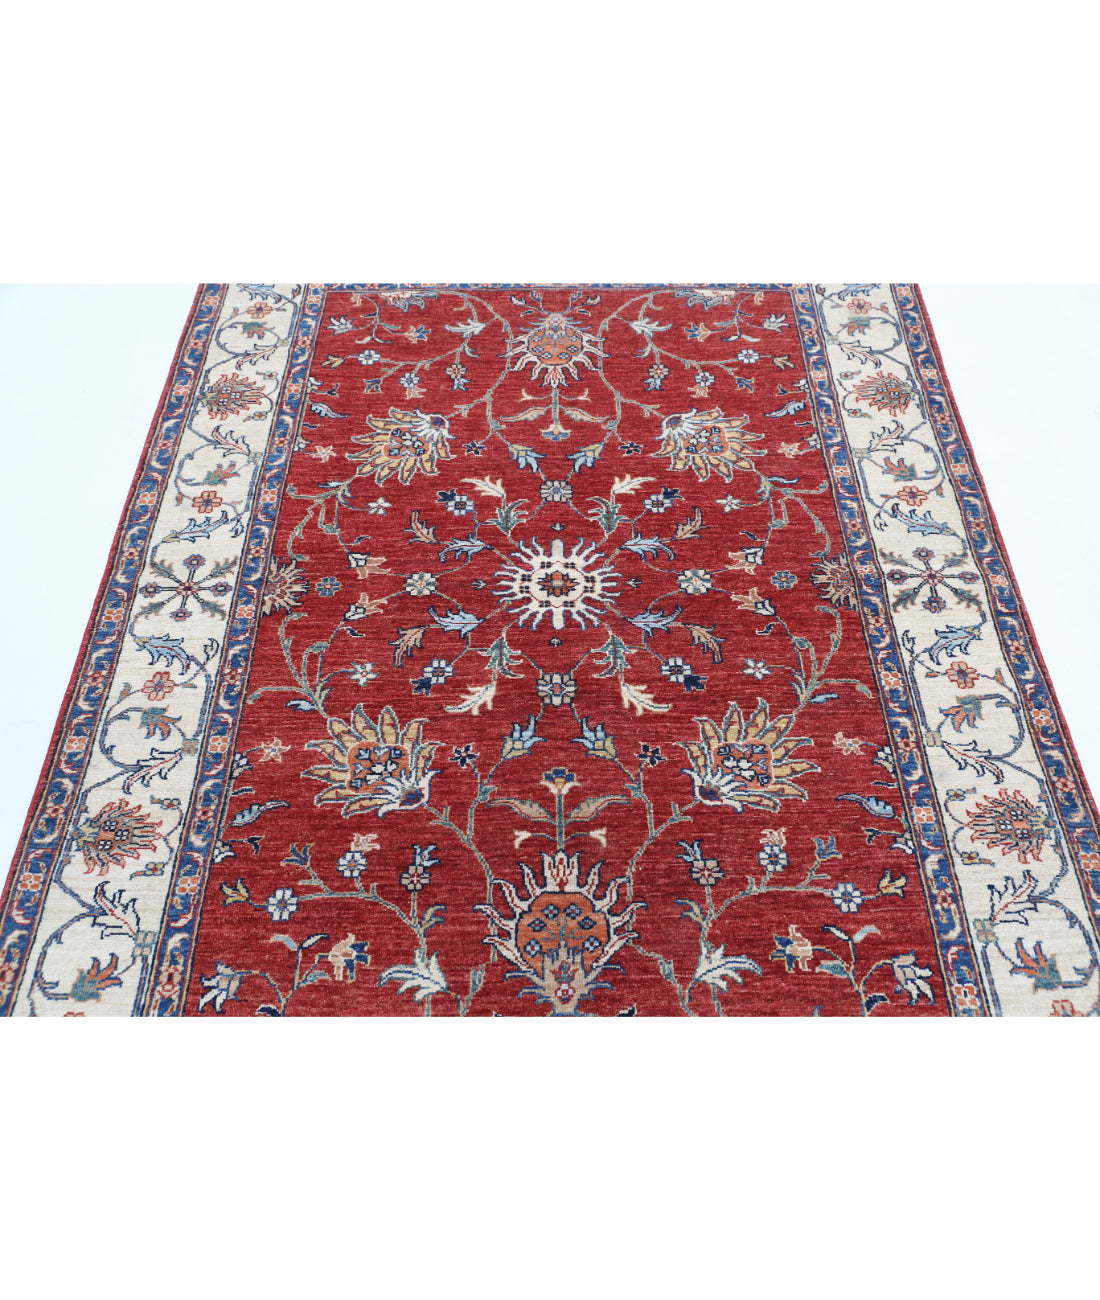 Hand Knotted Ziegler Farhan Wool Rug - 4'10'' x 6'9'' 4'10'' x 6'9'' (145 X 203) / Red / Ivory